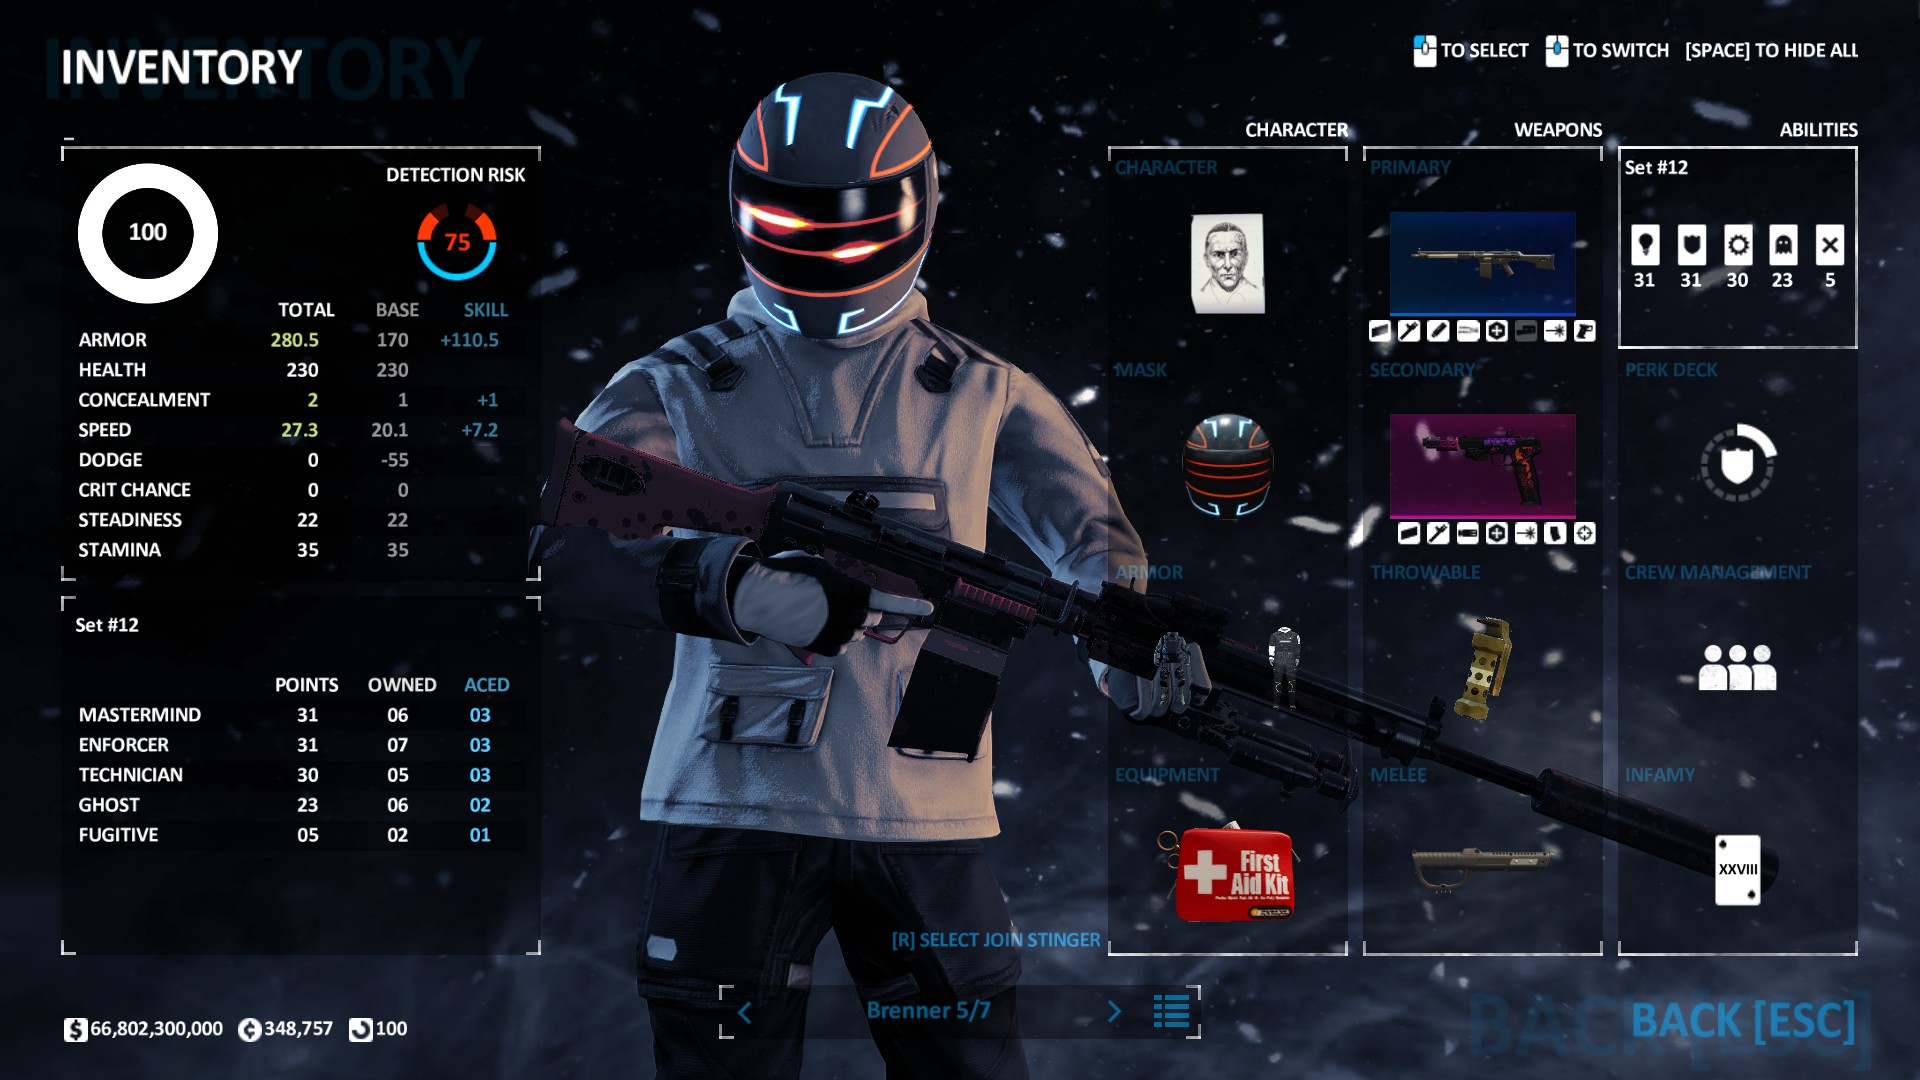 PAYDAY 2 Death Sentence One Down Builds - Brenner-21 LMG & 5/7 AP Pistol [Armorer] (3) - 4ACF50A